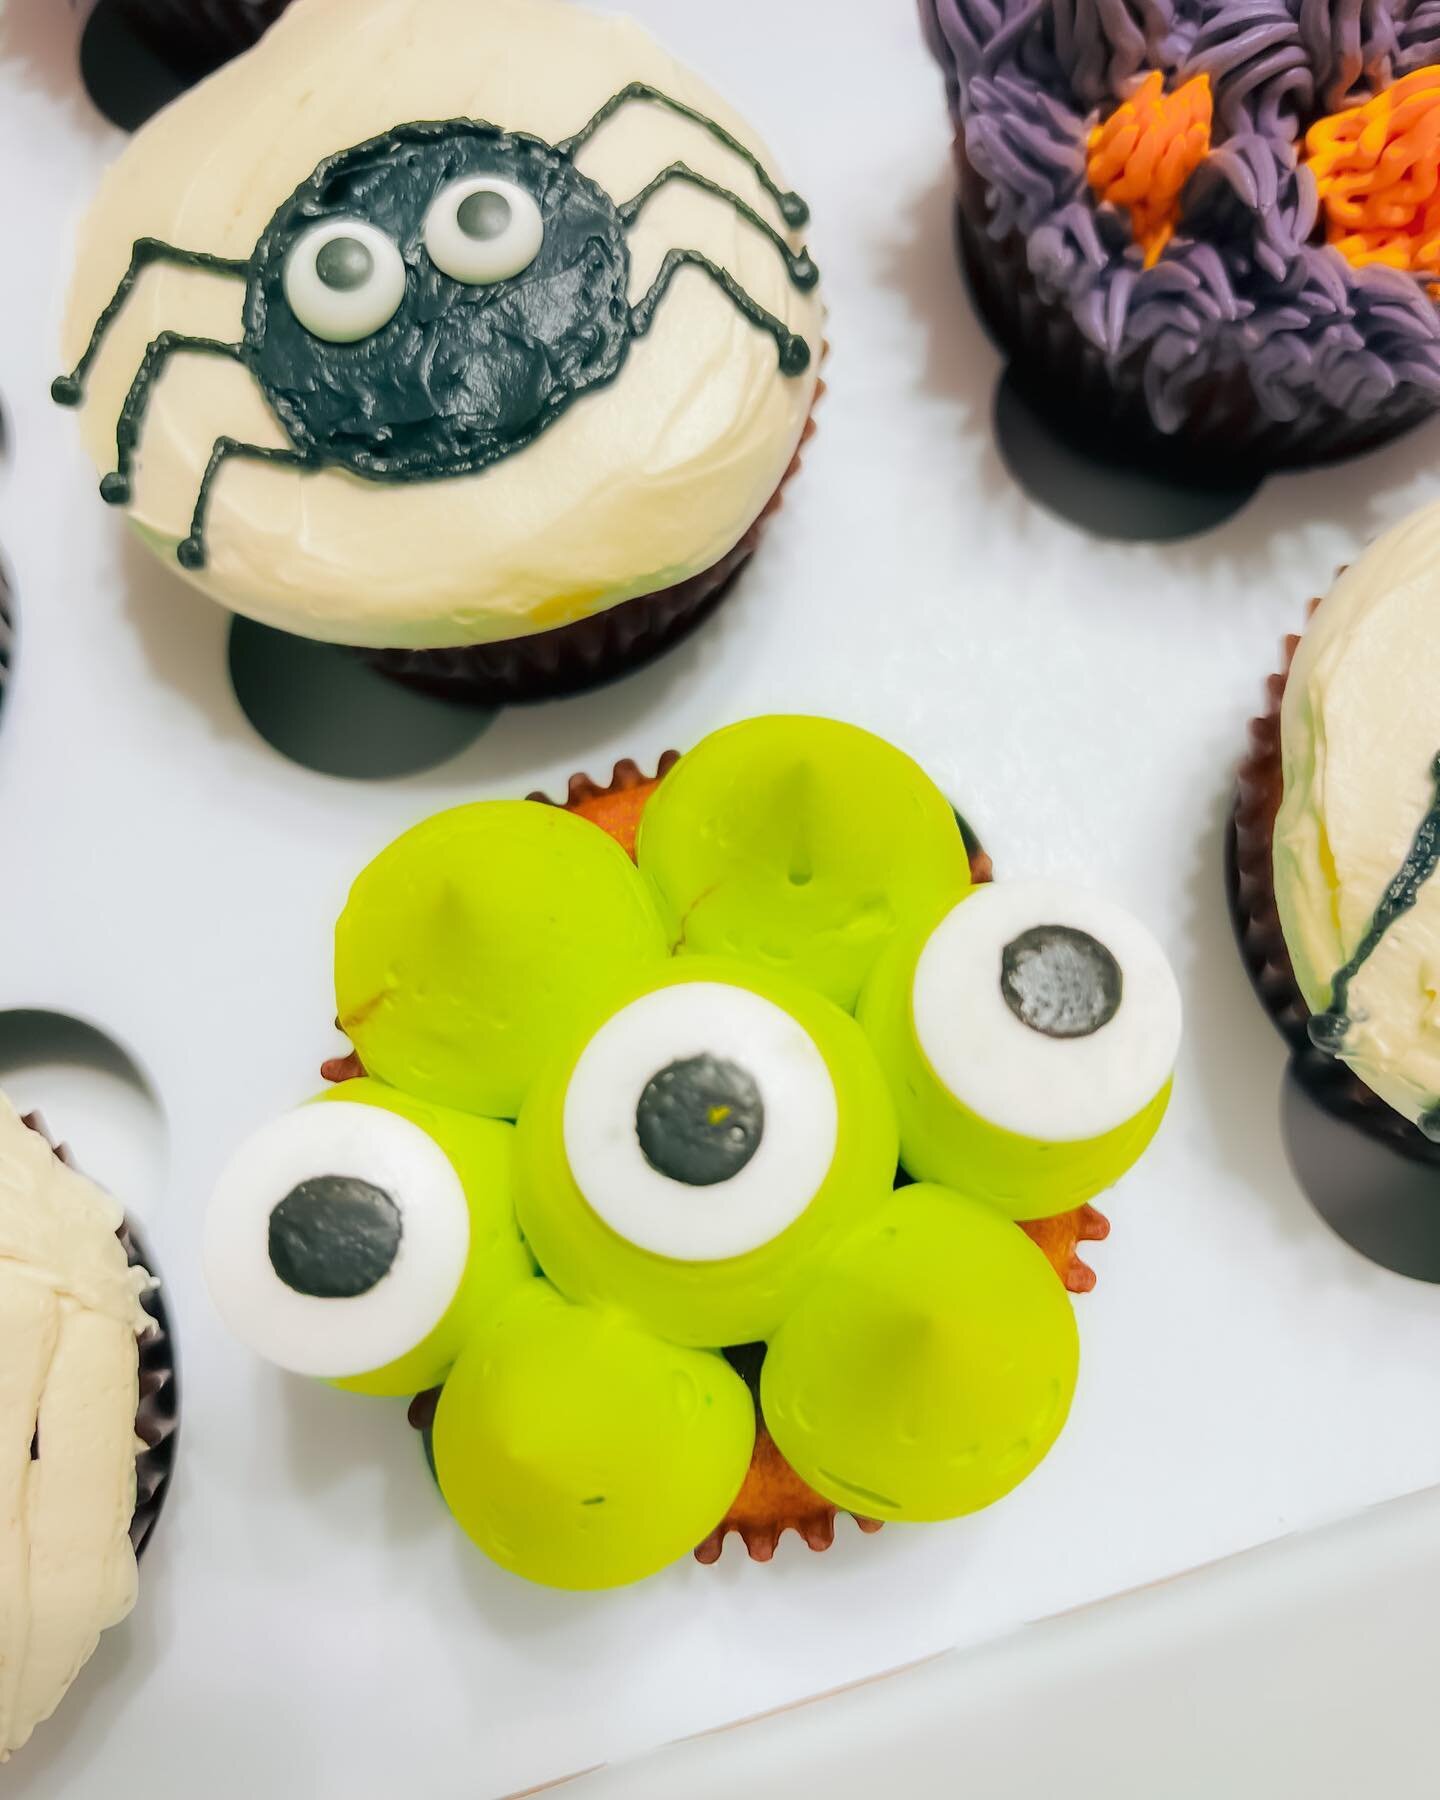 🕷️🍰 Unleash the cutest monsters in town! From furry fiends to green-eyed ghouls, my Halloween cupcakes are to die for! Dare to try one? Order Willow Tree Cupcakes if you dare! 🎃👻